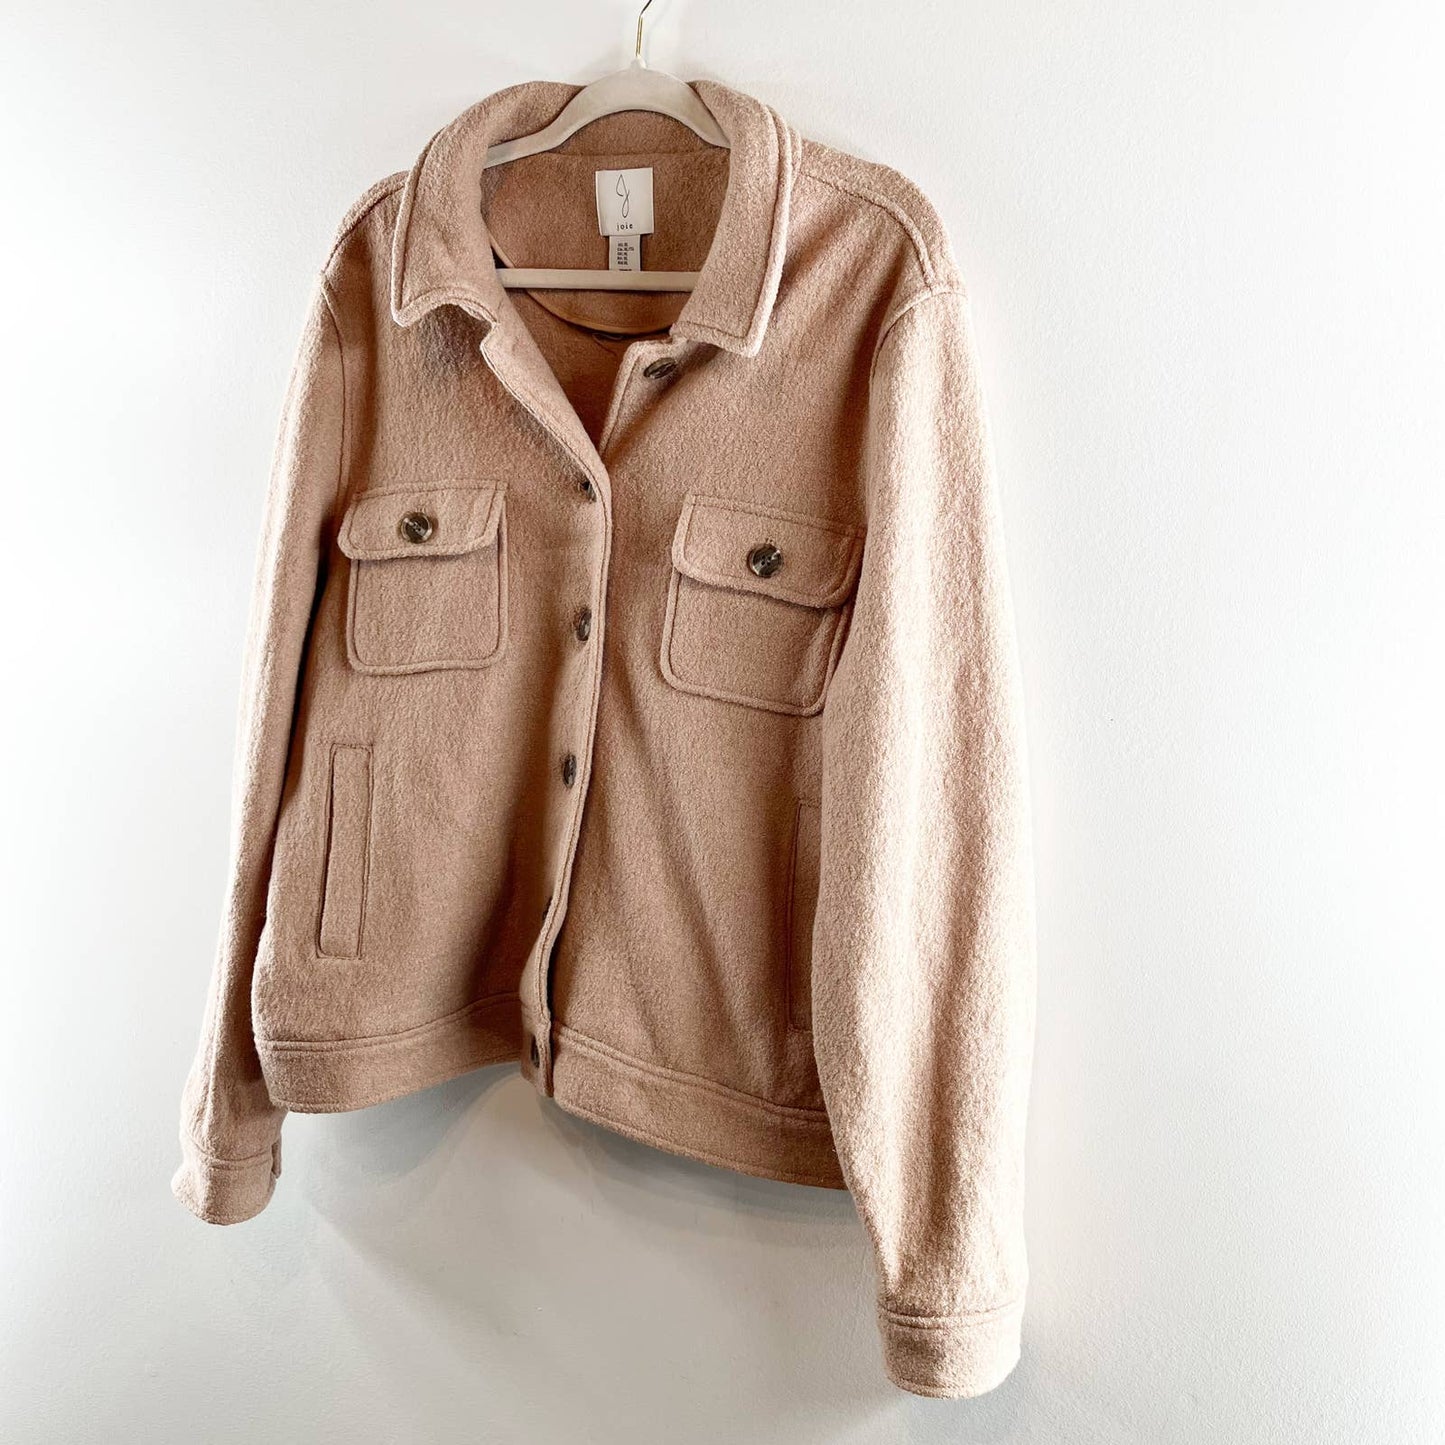 Joie Fleece Button Cuffed Sleeve Collared Button Front Jacket with Pocket Tan XL